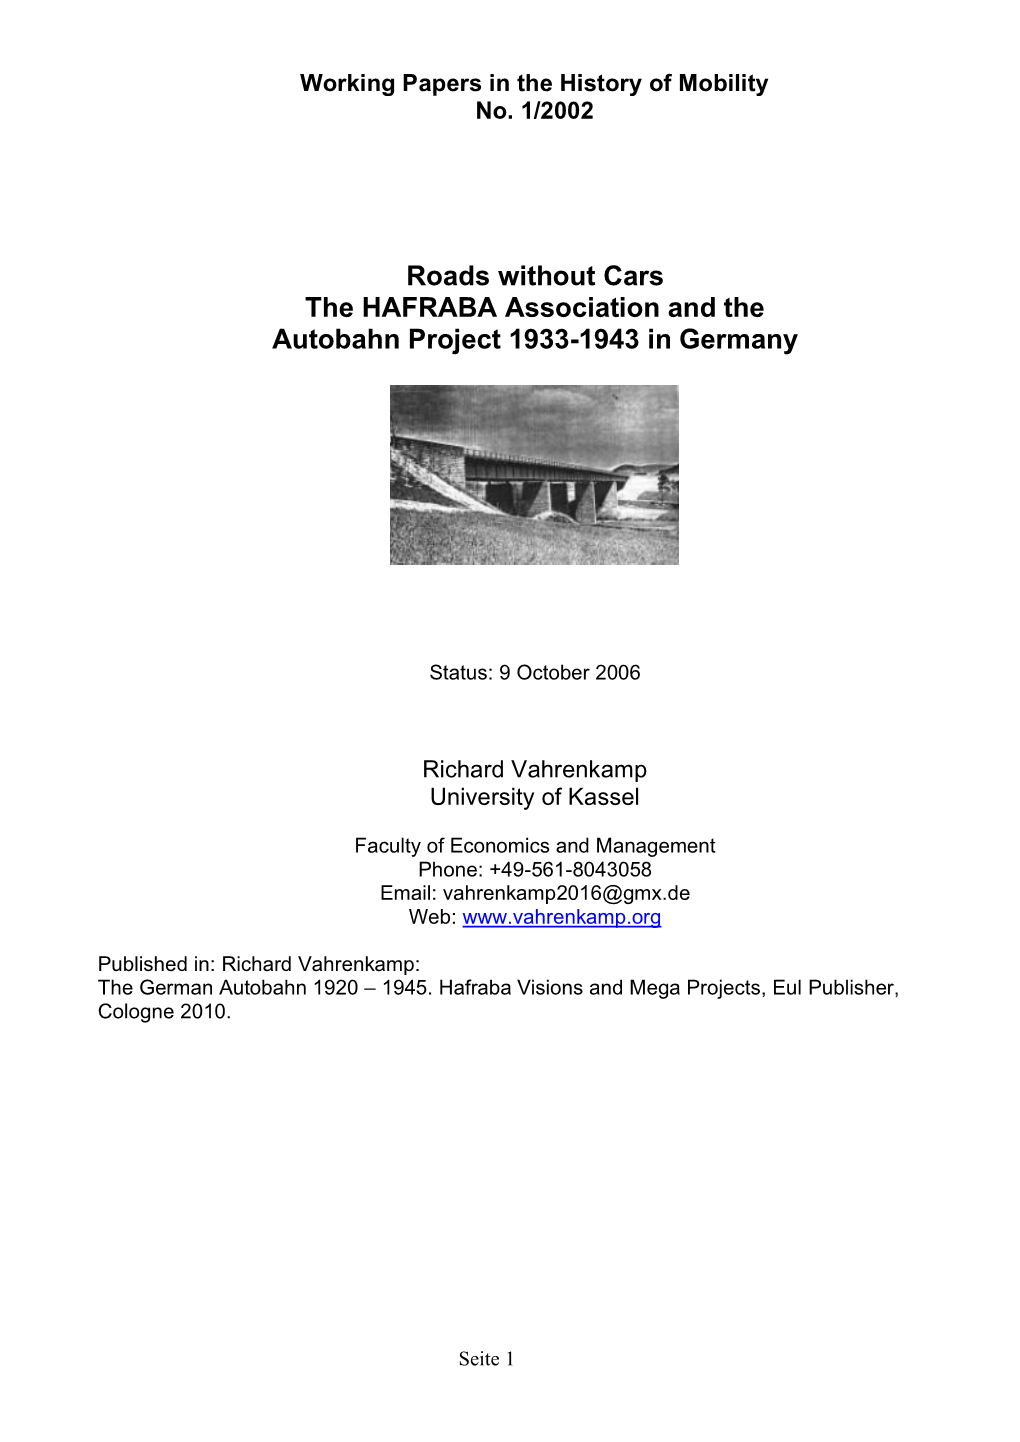 Roads Without Cars the HAFRABA Association and the Autobahn Project 1933-1943 in Germany